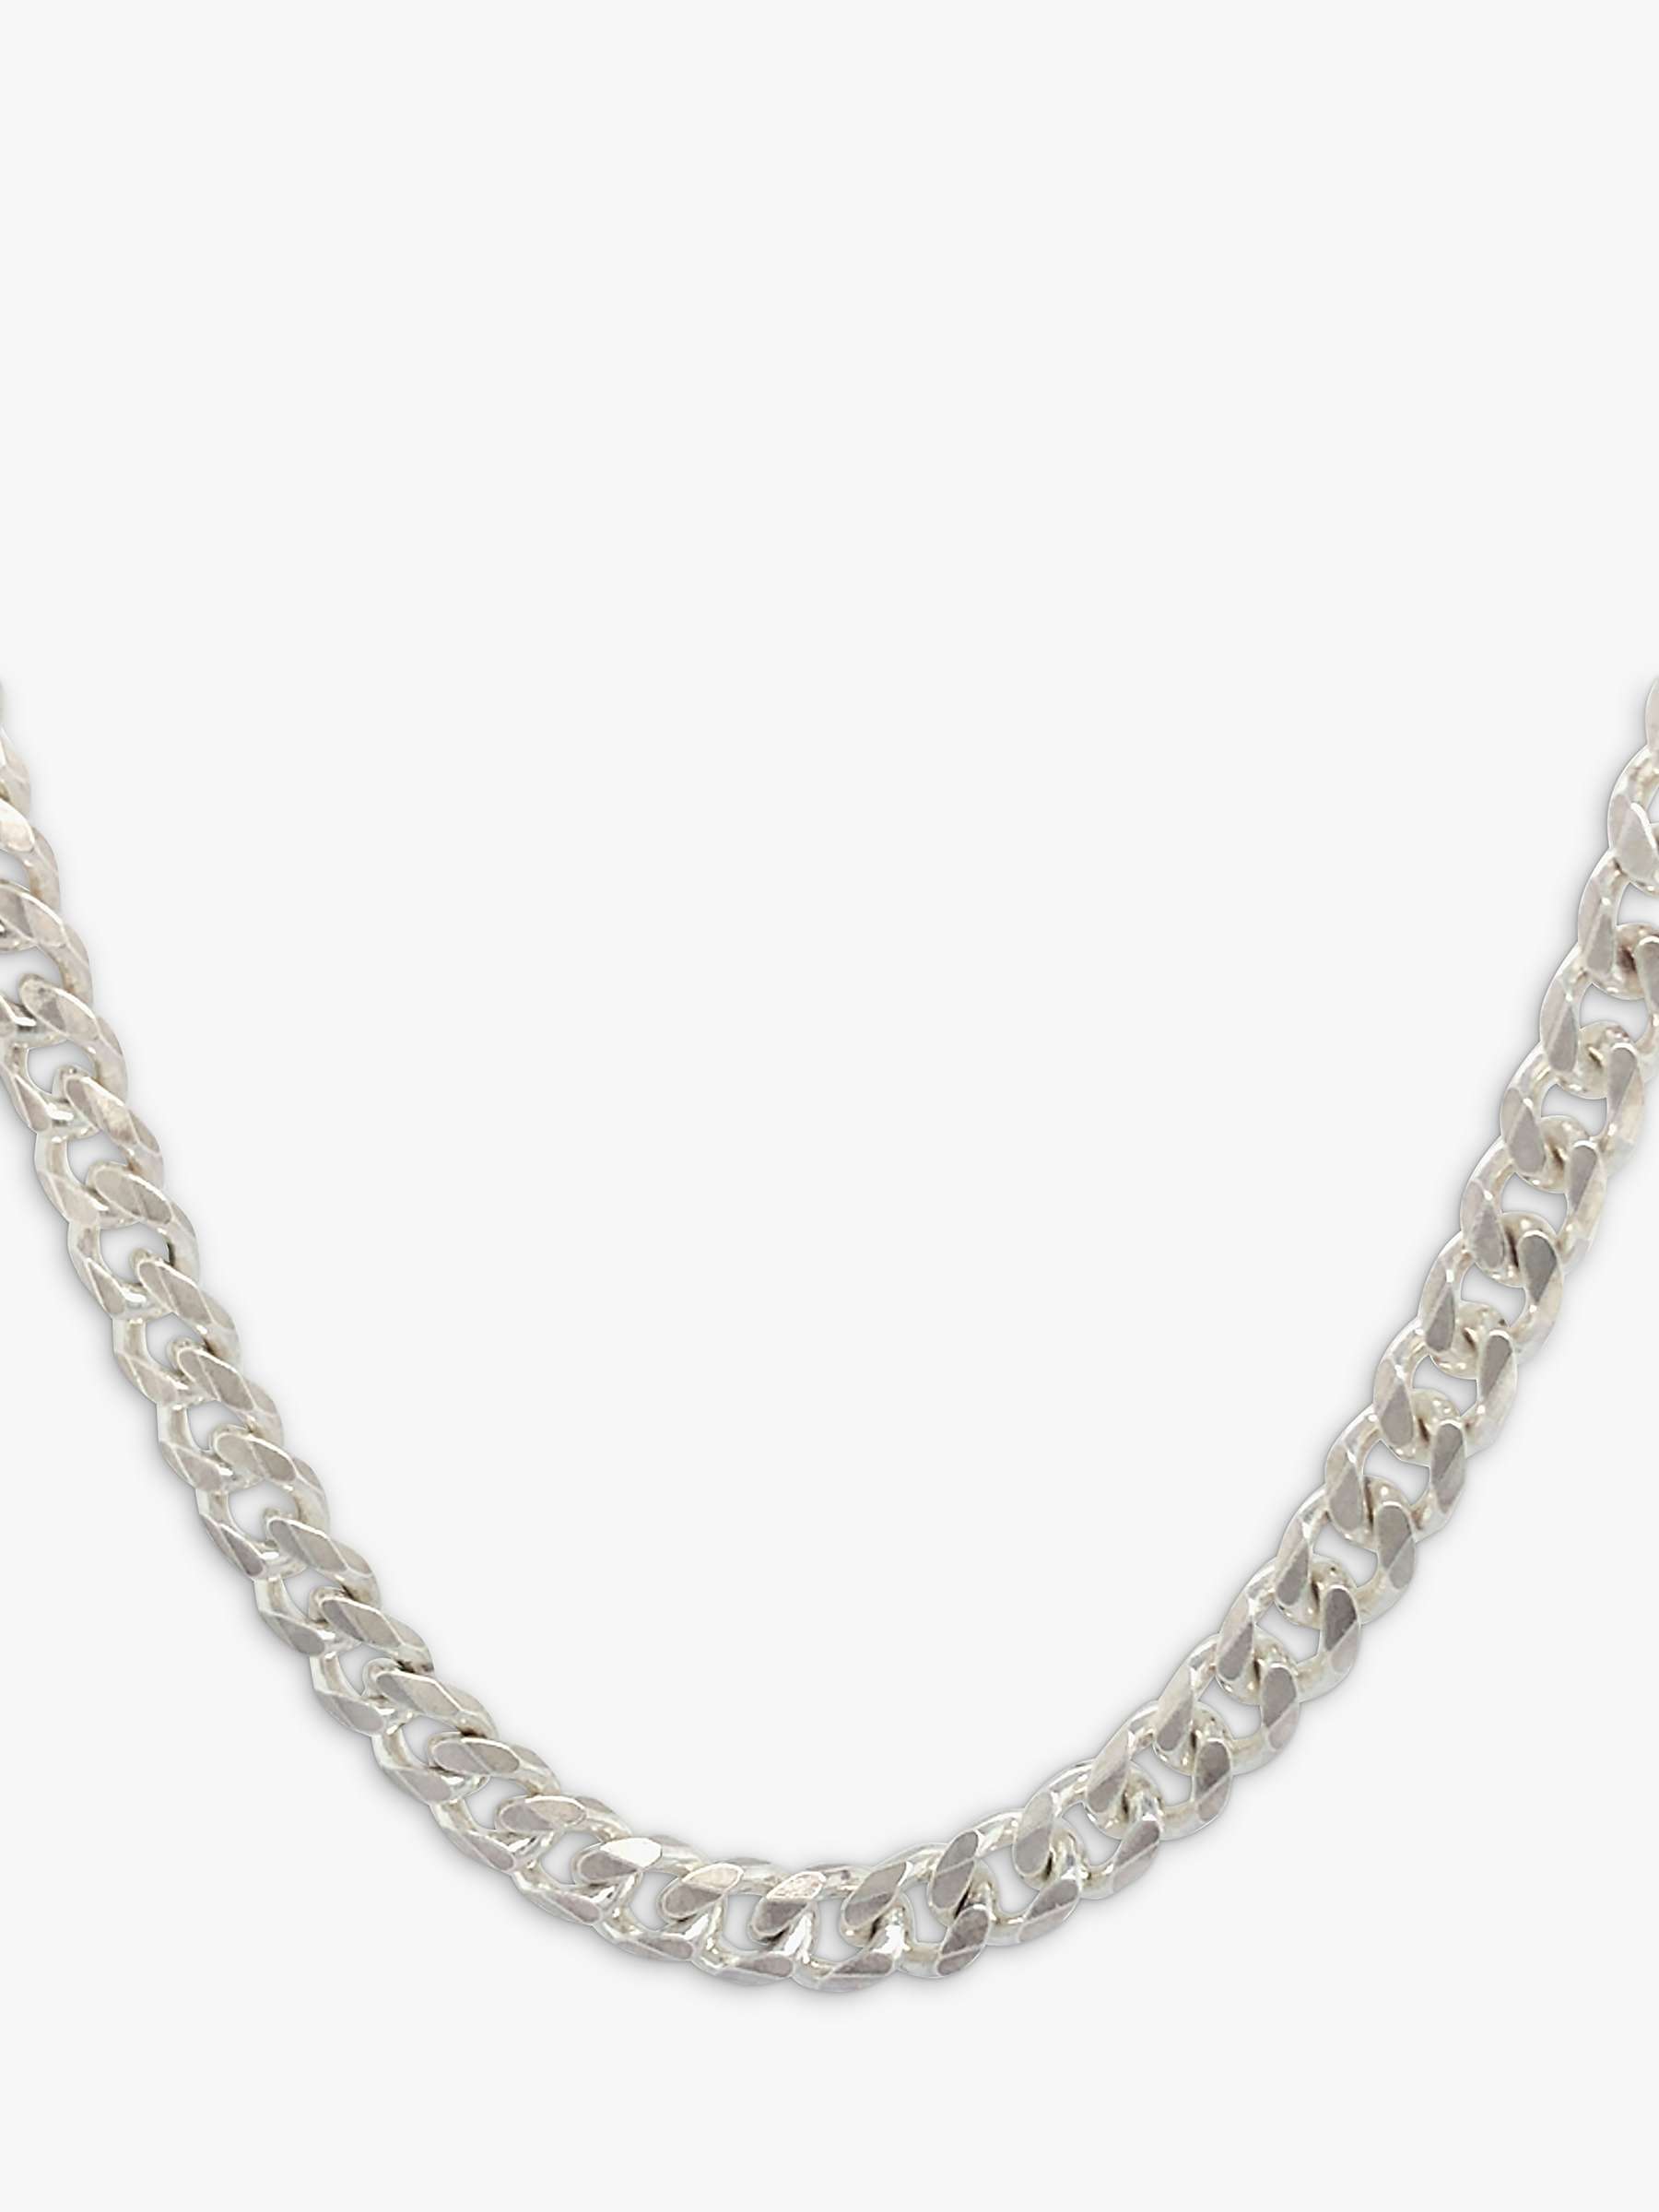 Buy Vintage Fine Jewellery Second Hand Flat Curb Link Chain Necklace, Dated Birmingham 2001 Online at johnlewis.com